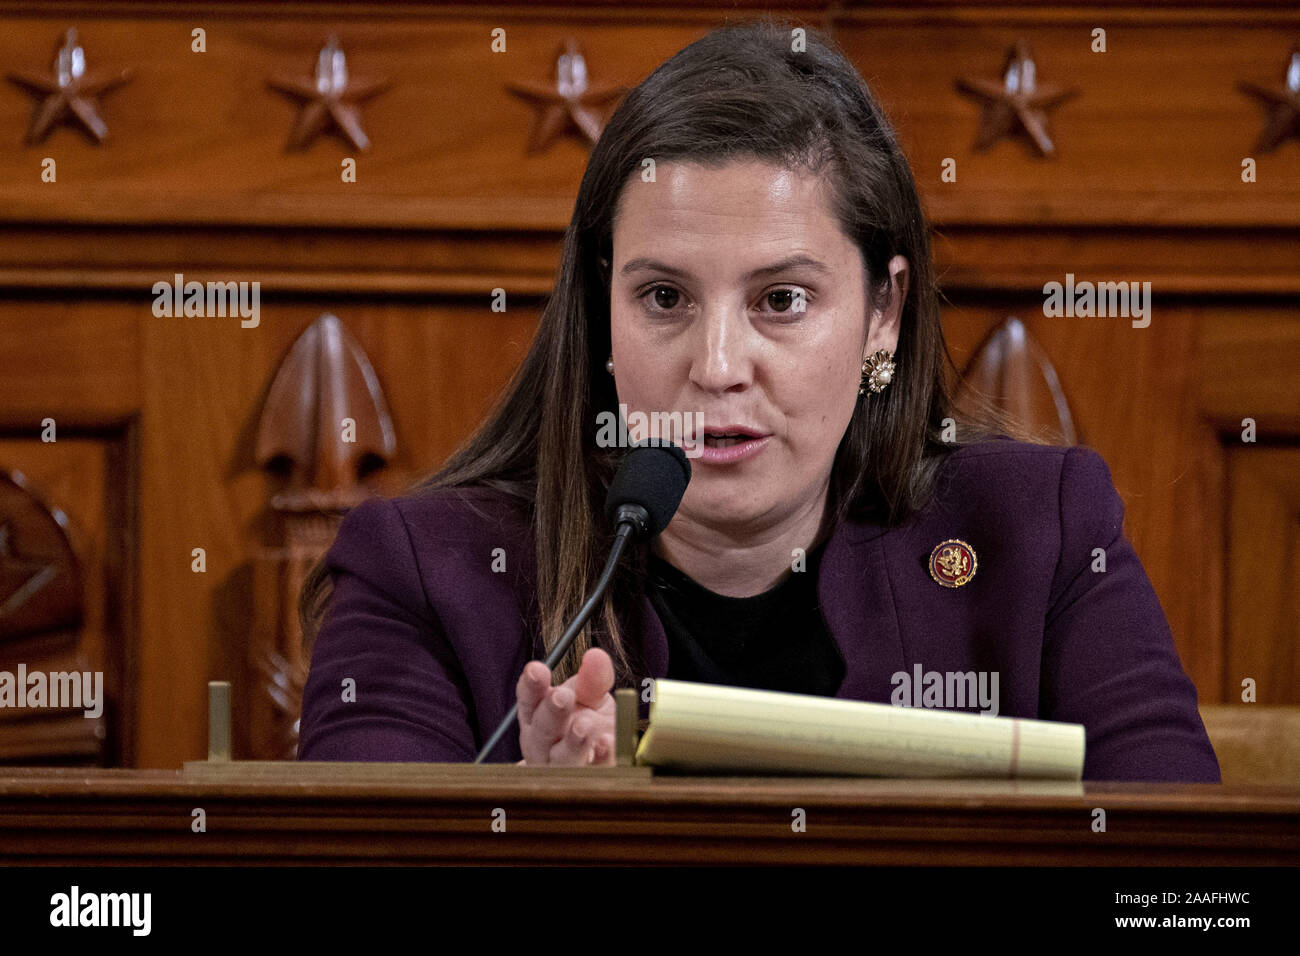 Washington, United States. 21st Nov, 2019. Rep. Elise Stefanik, R-N.Y., questions witnesses during a House Intelligence Committee impeachment inquiry hearing on Capitol Hill in Washington, DC on Thursday, November 21, 2019. The committee is receiving testimony from nine witnesses in open hearings this week in the impeachment inquiry into President Donald Trump. Credit: UPI/Alamy Live News Stock Photo